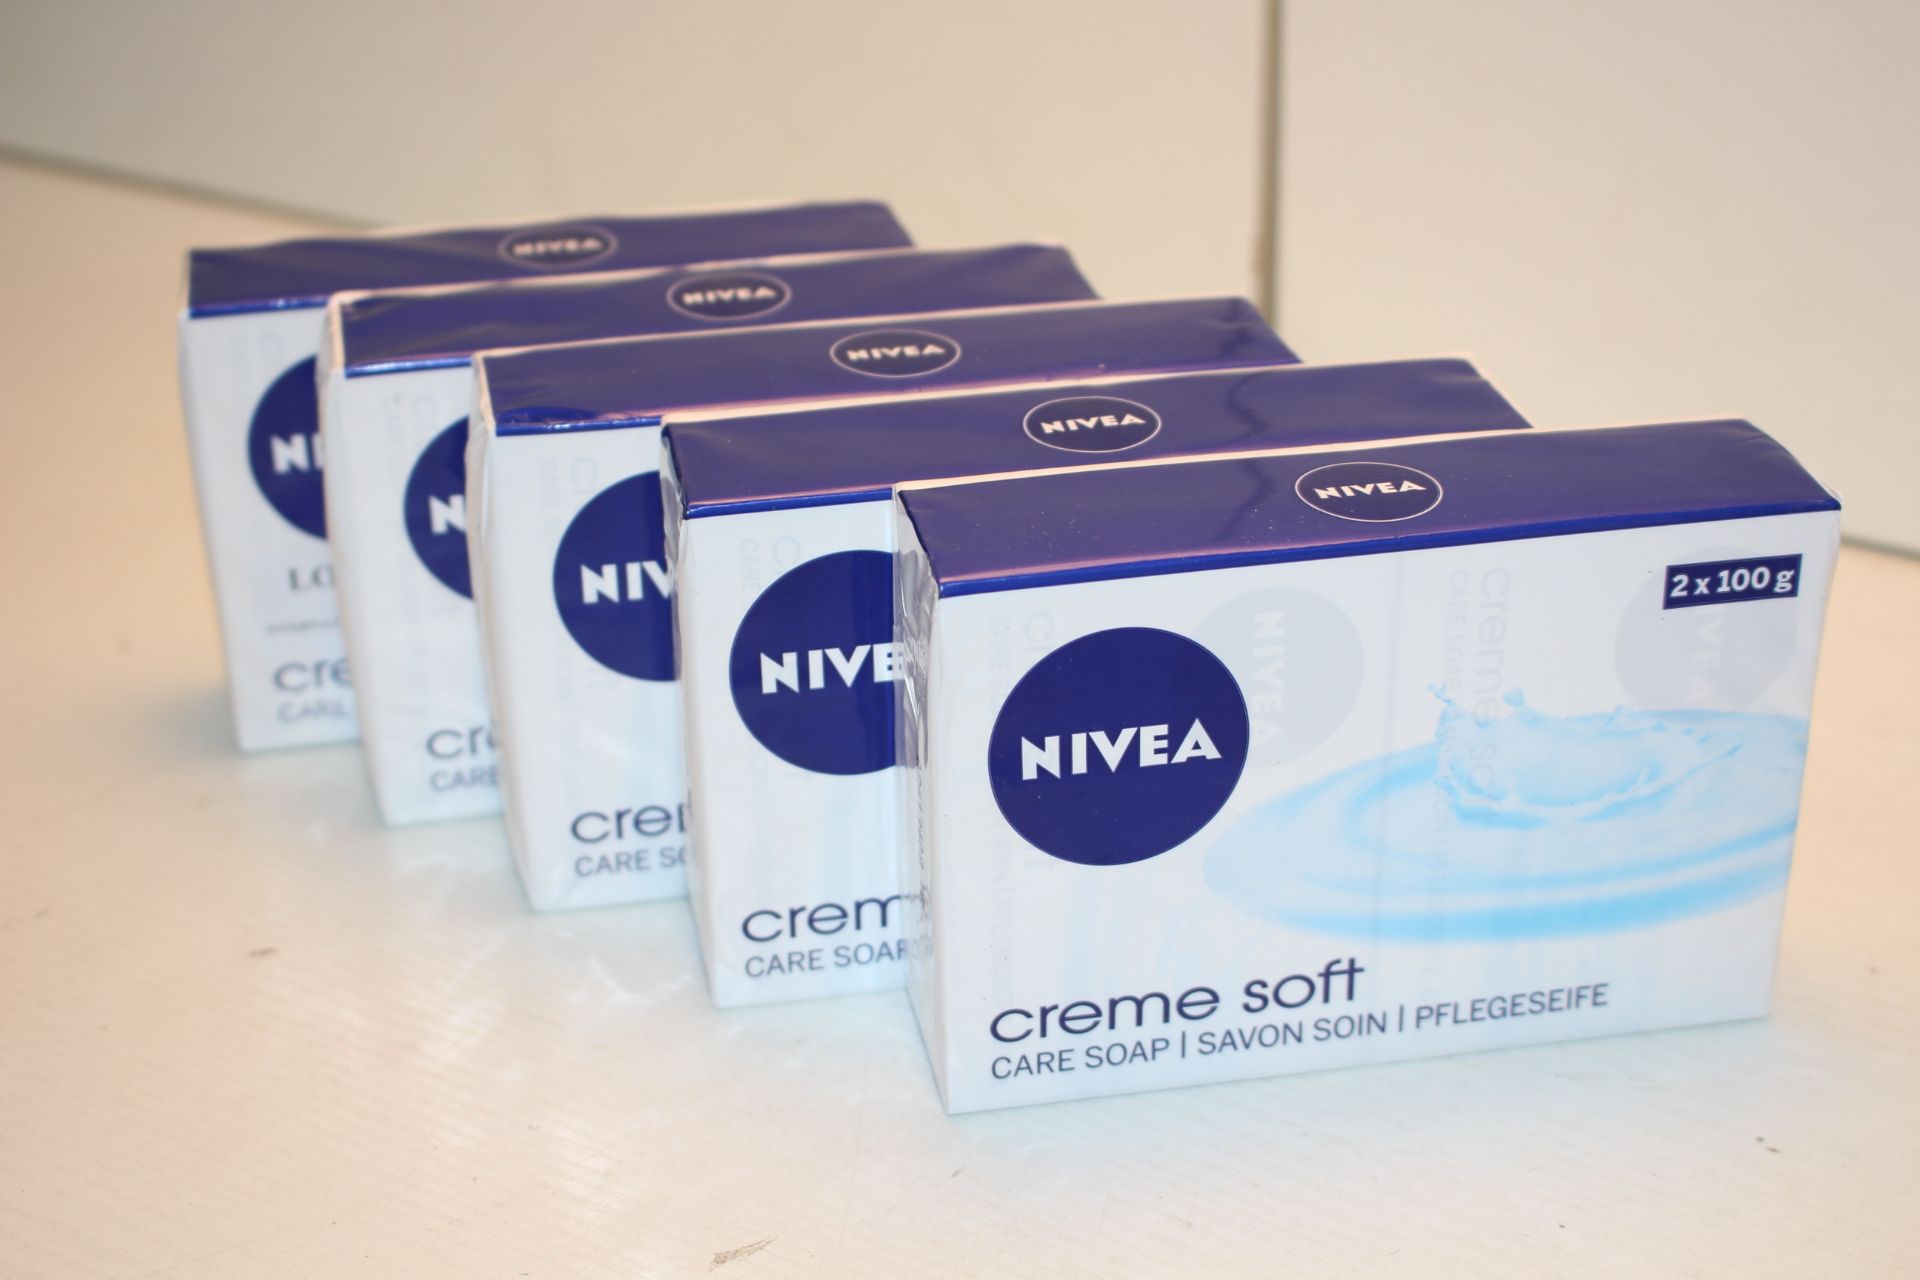 5X 2PACKS NIVEA CRÈME SOFT CARE SOAP (10X 100G)Condition ReportAppraisal Available on Request- All